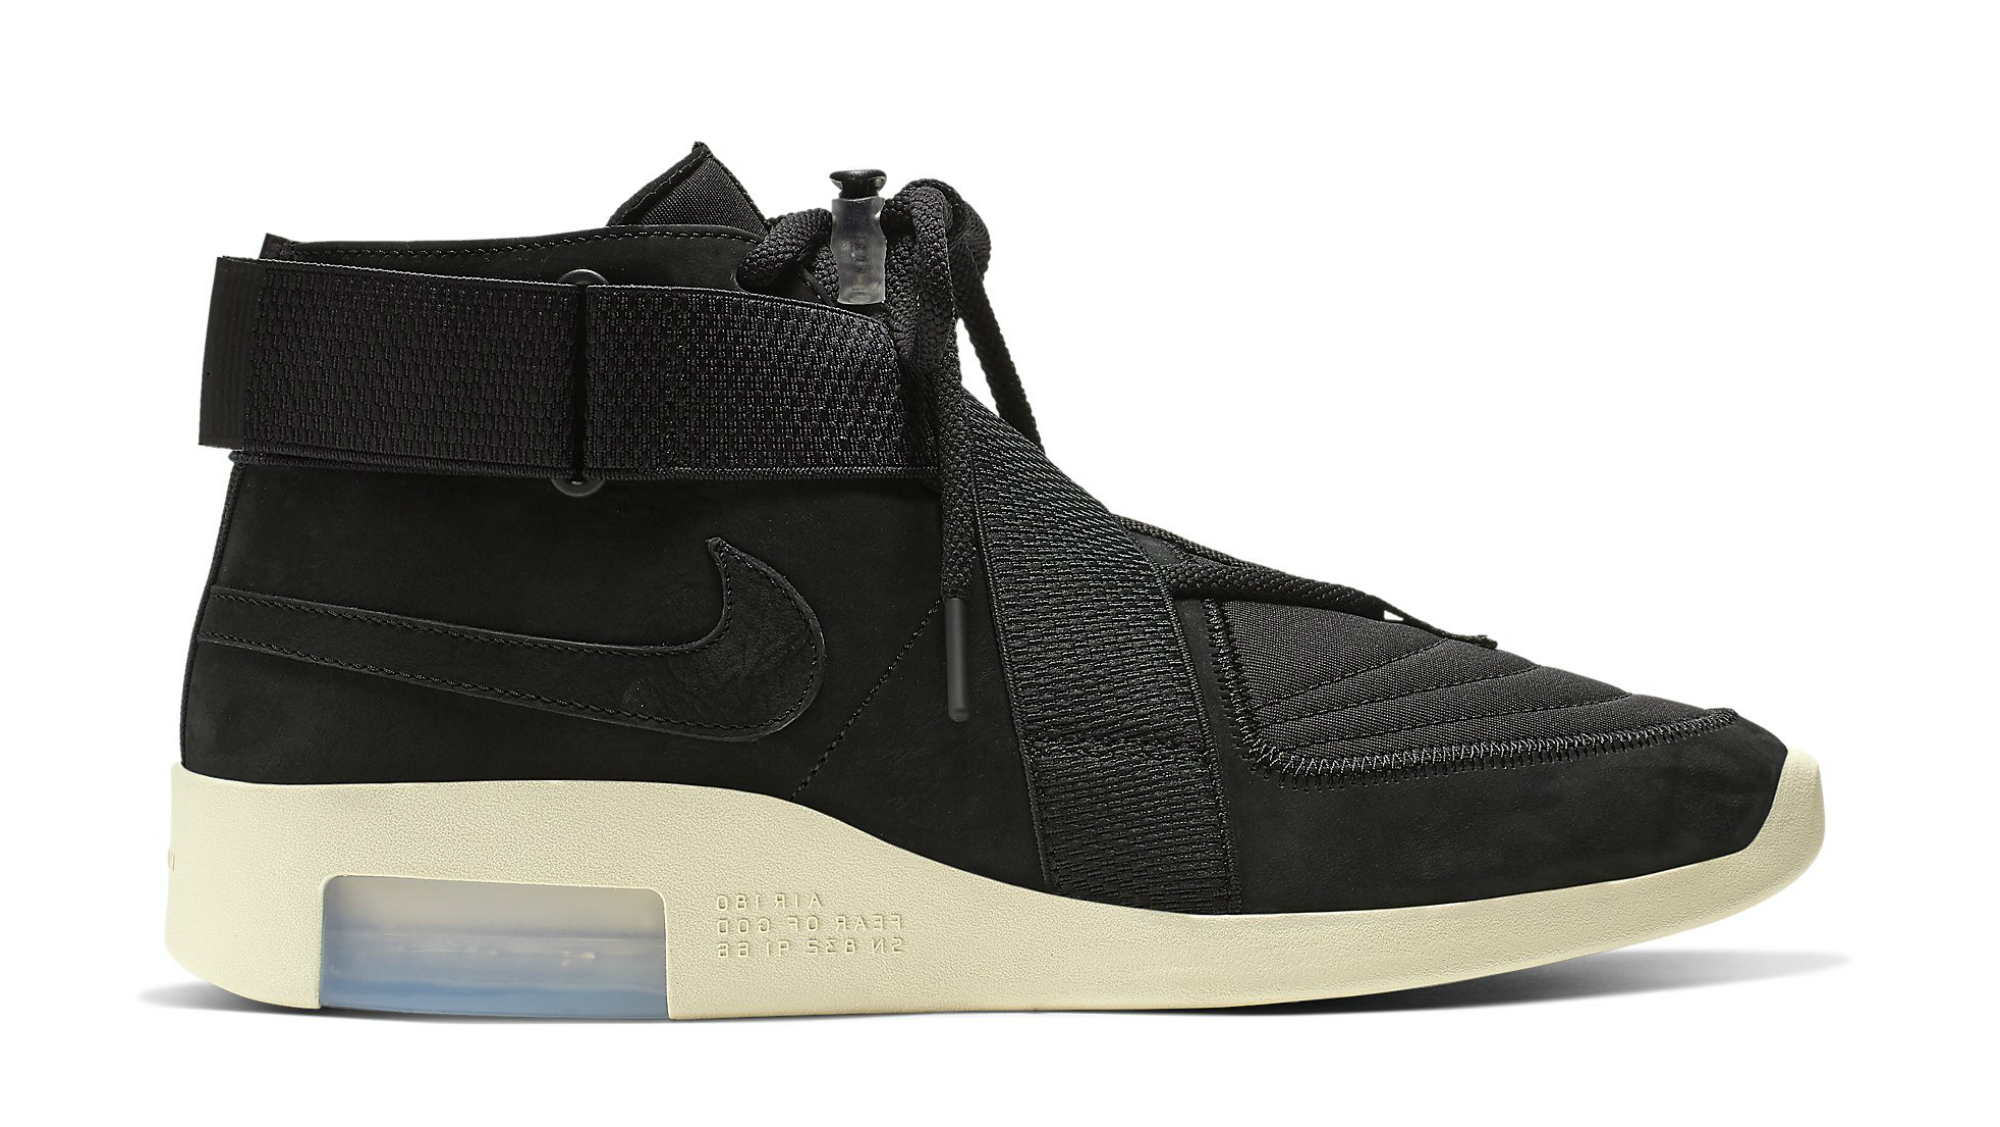 nike air fear of god 180 black at8087 002 release date